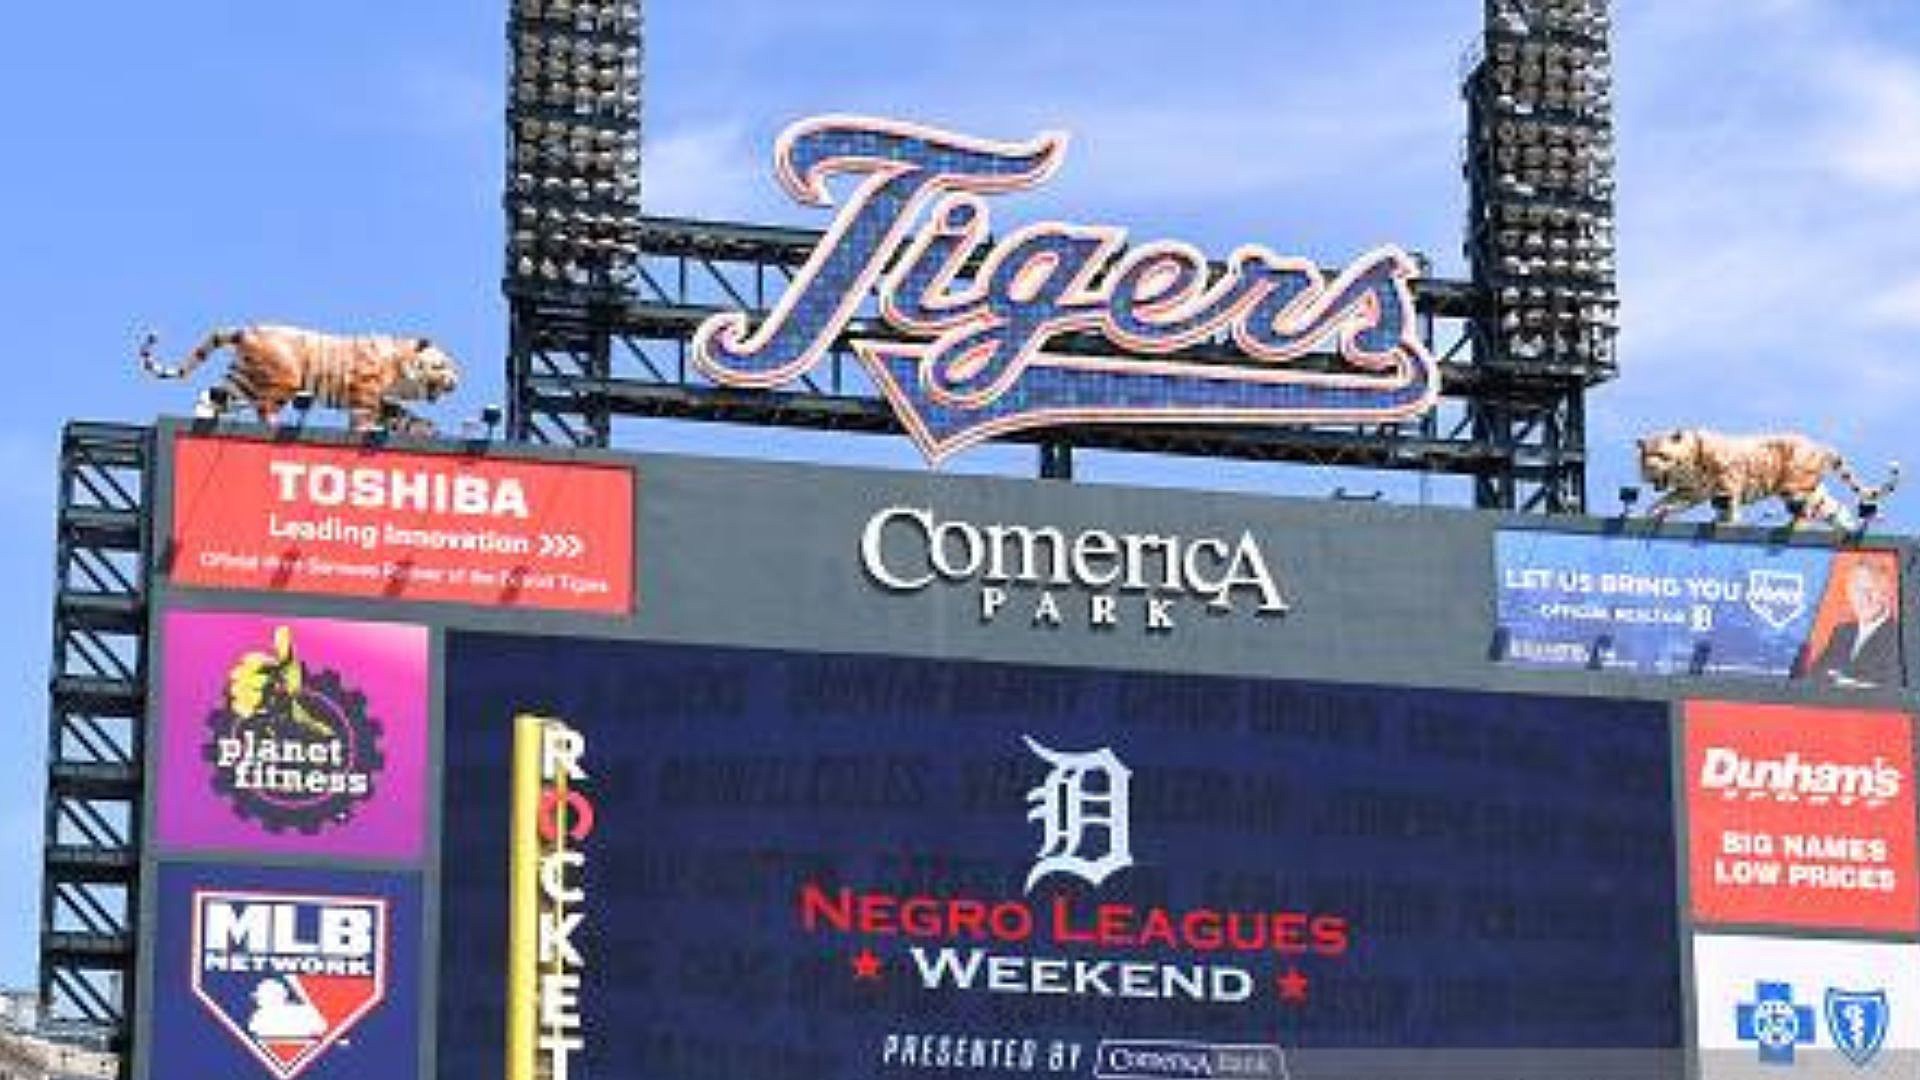 You have the chance to golf at Comerica Park